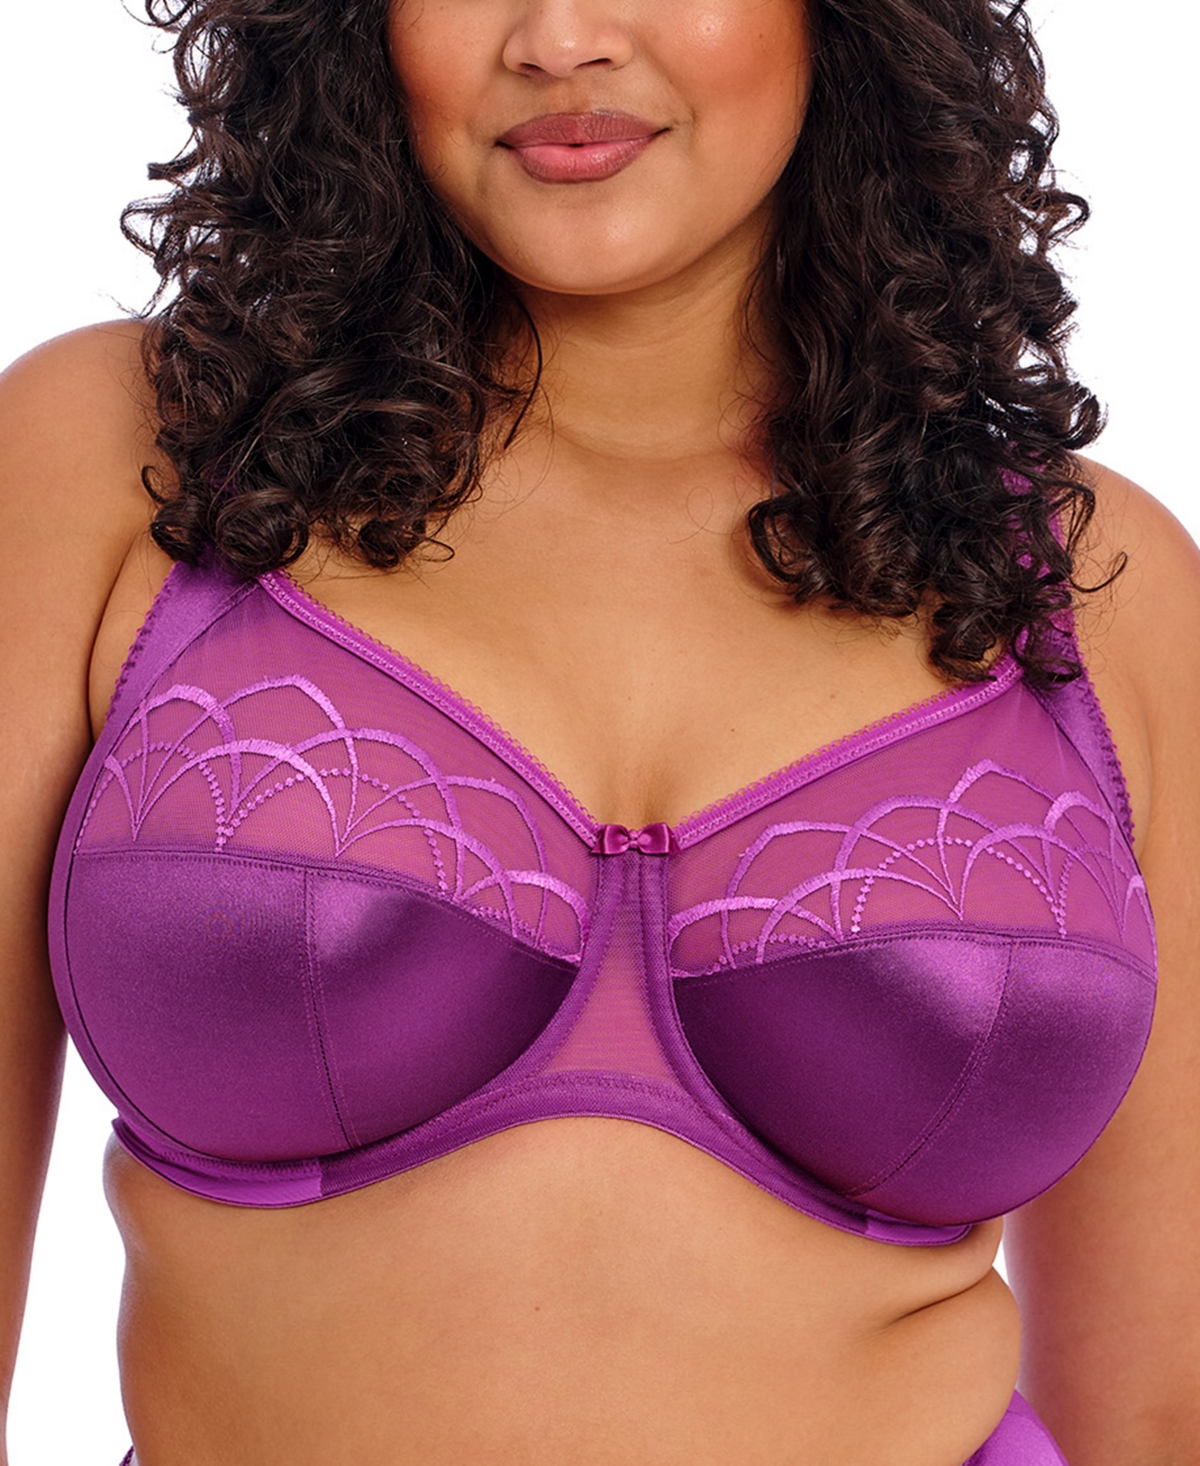 Cate Full Figure Underwire Lace Cup Bra EL4030, Online Only - Berry